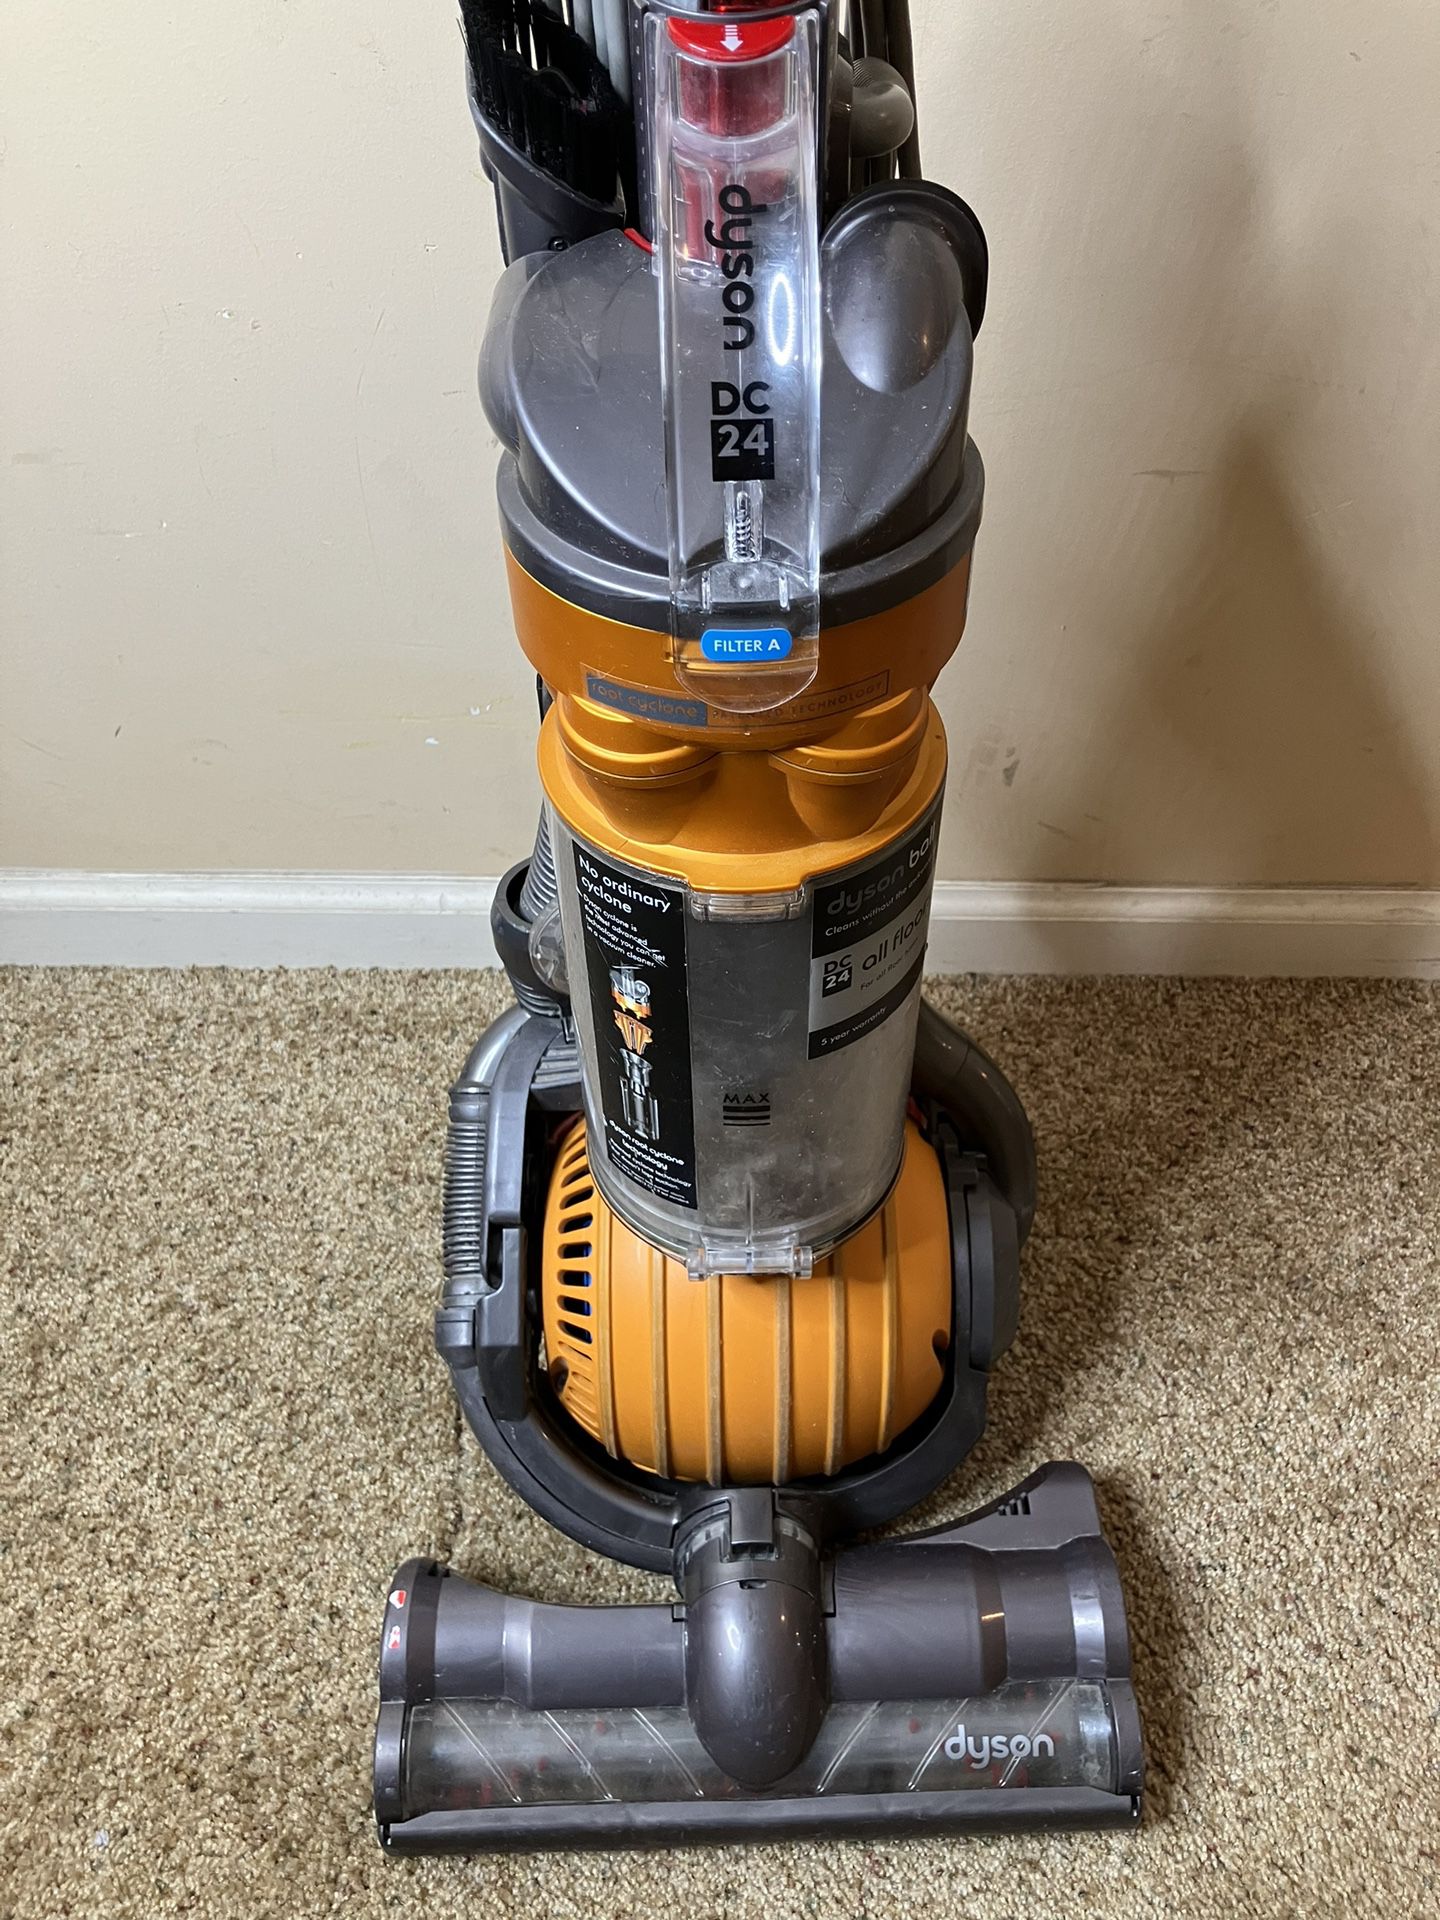 Completely Cleaned DYSON Ball DC24